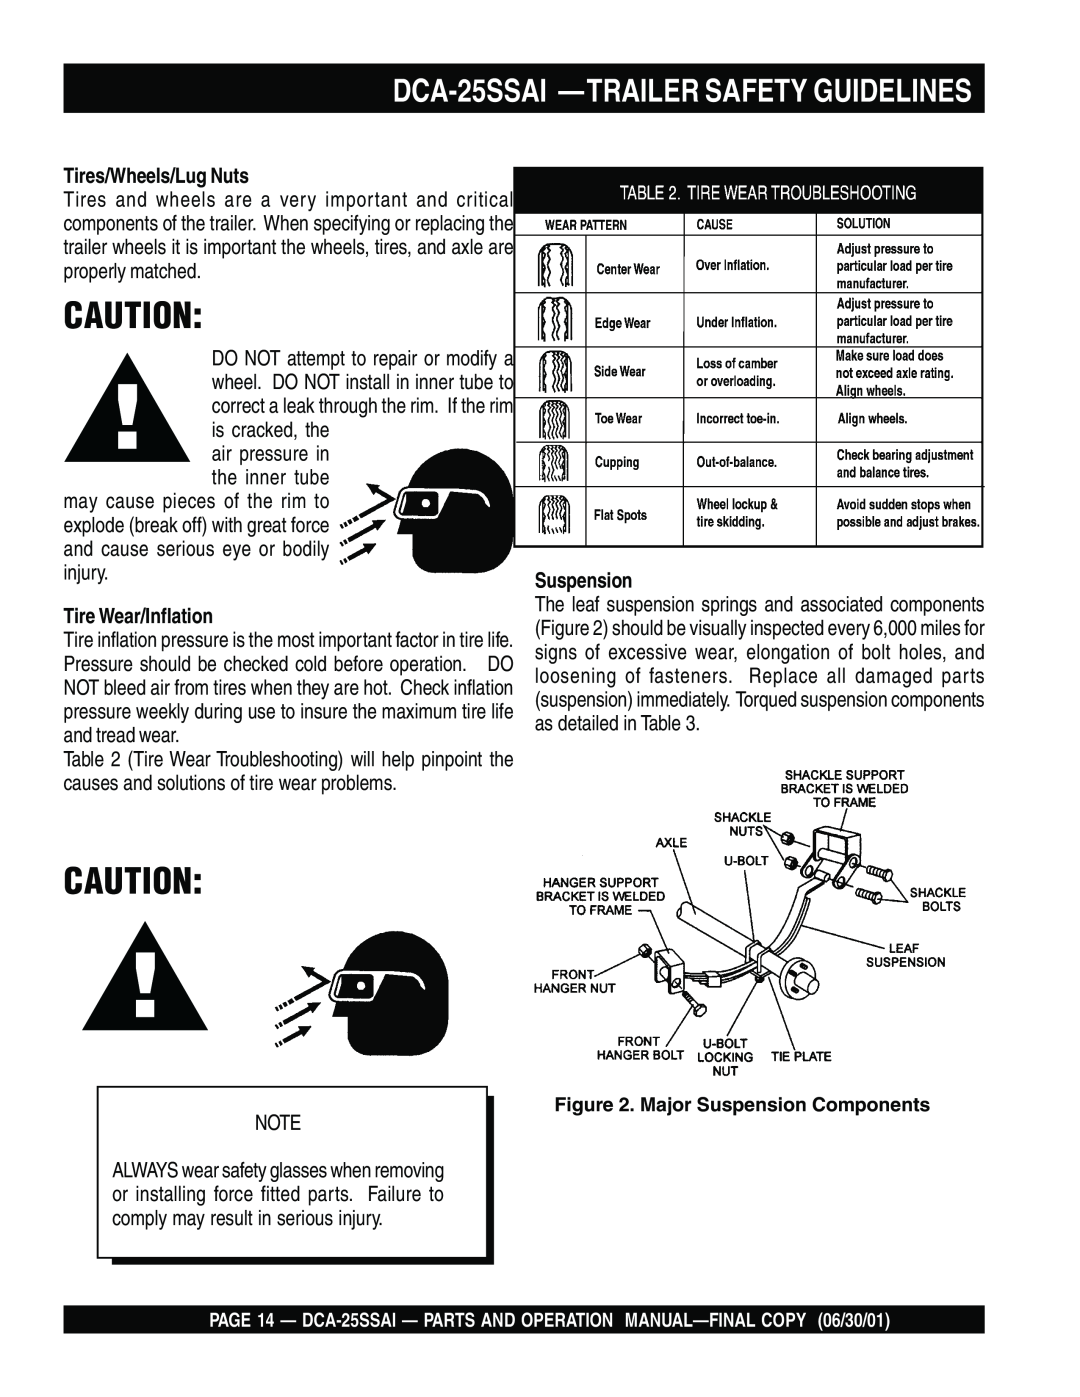 Multiquip operation manual DCA-25SSAI -TRAILER SAFETY GUIDELINES, Tires/Wheels/Lug Nuts, Tire Wear/Inflation, Suspension 